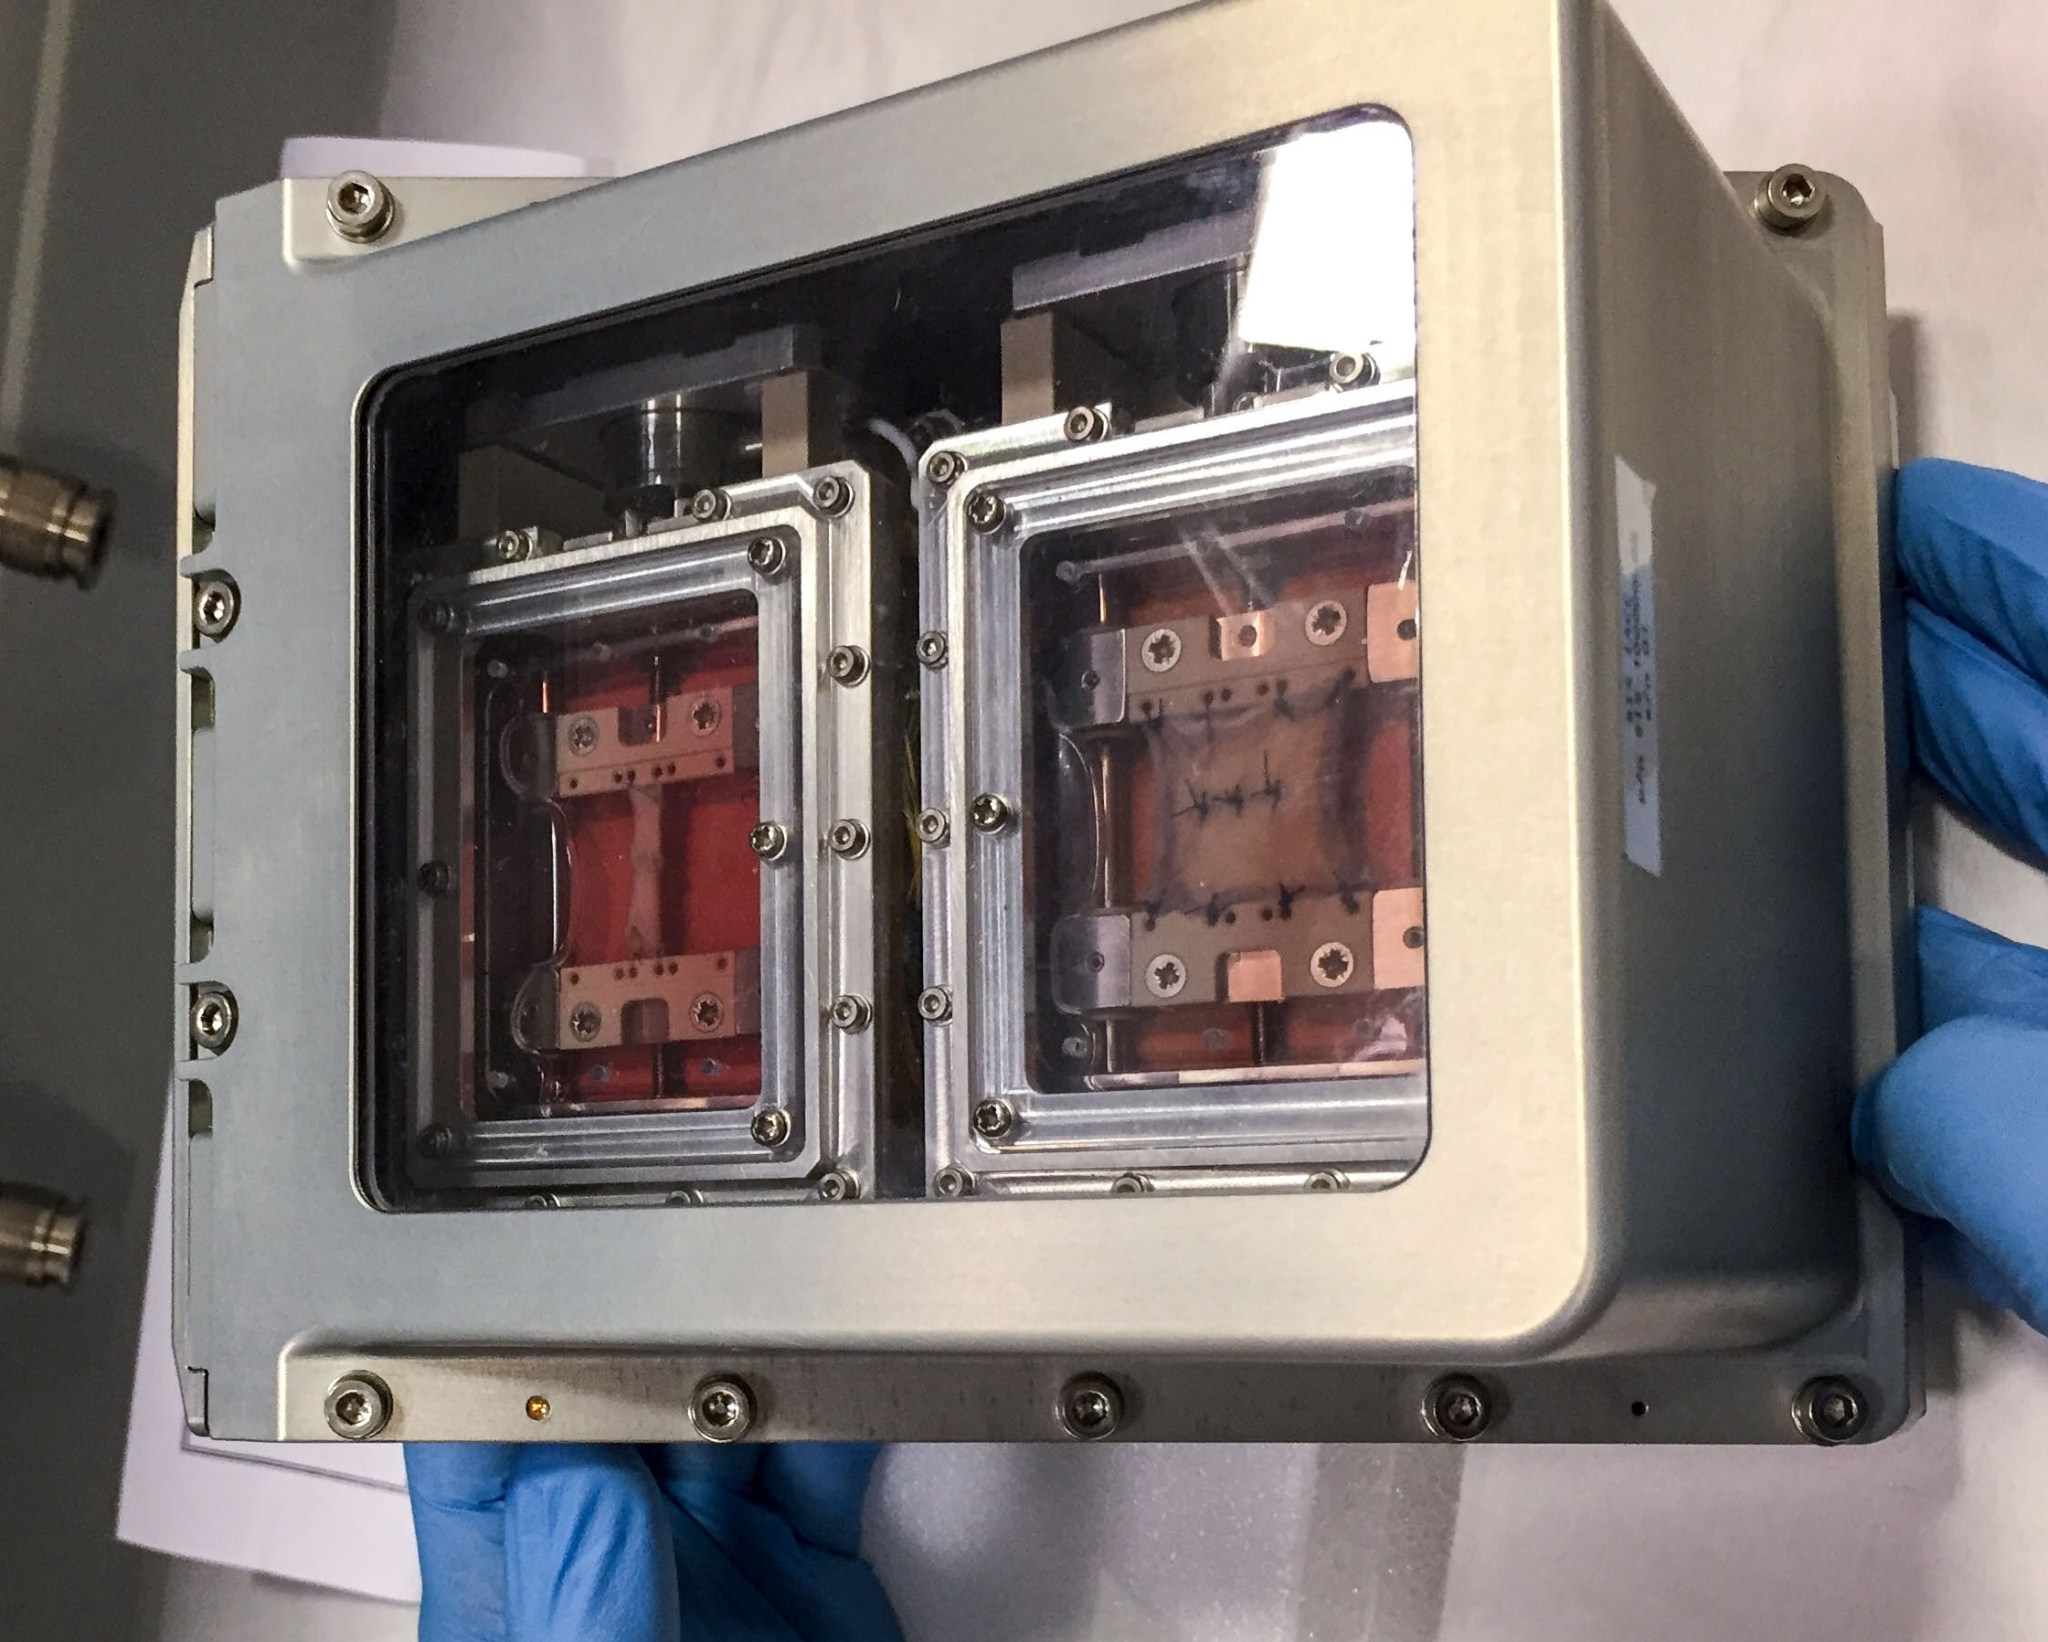 image of experiment hardware holding the experiment samples